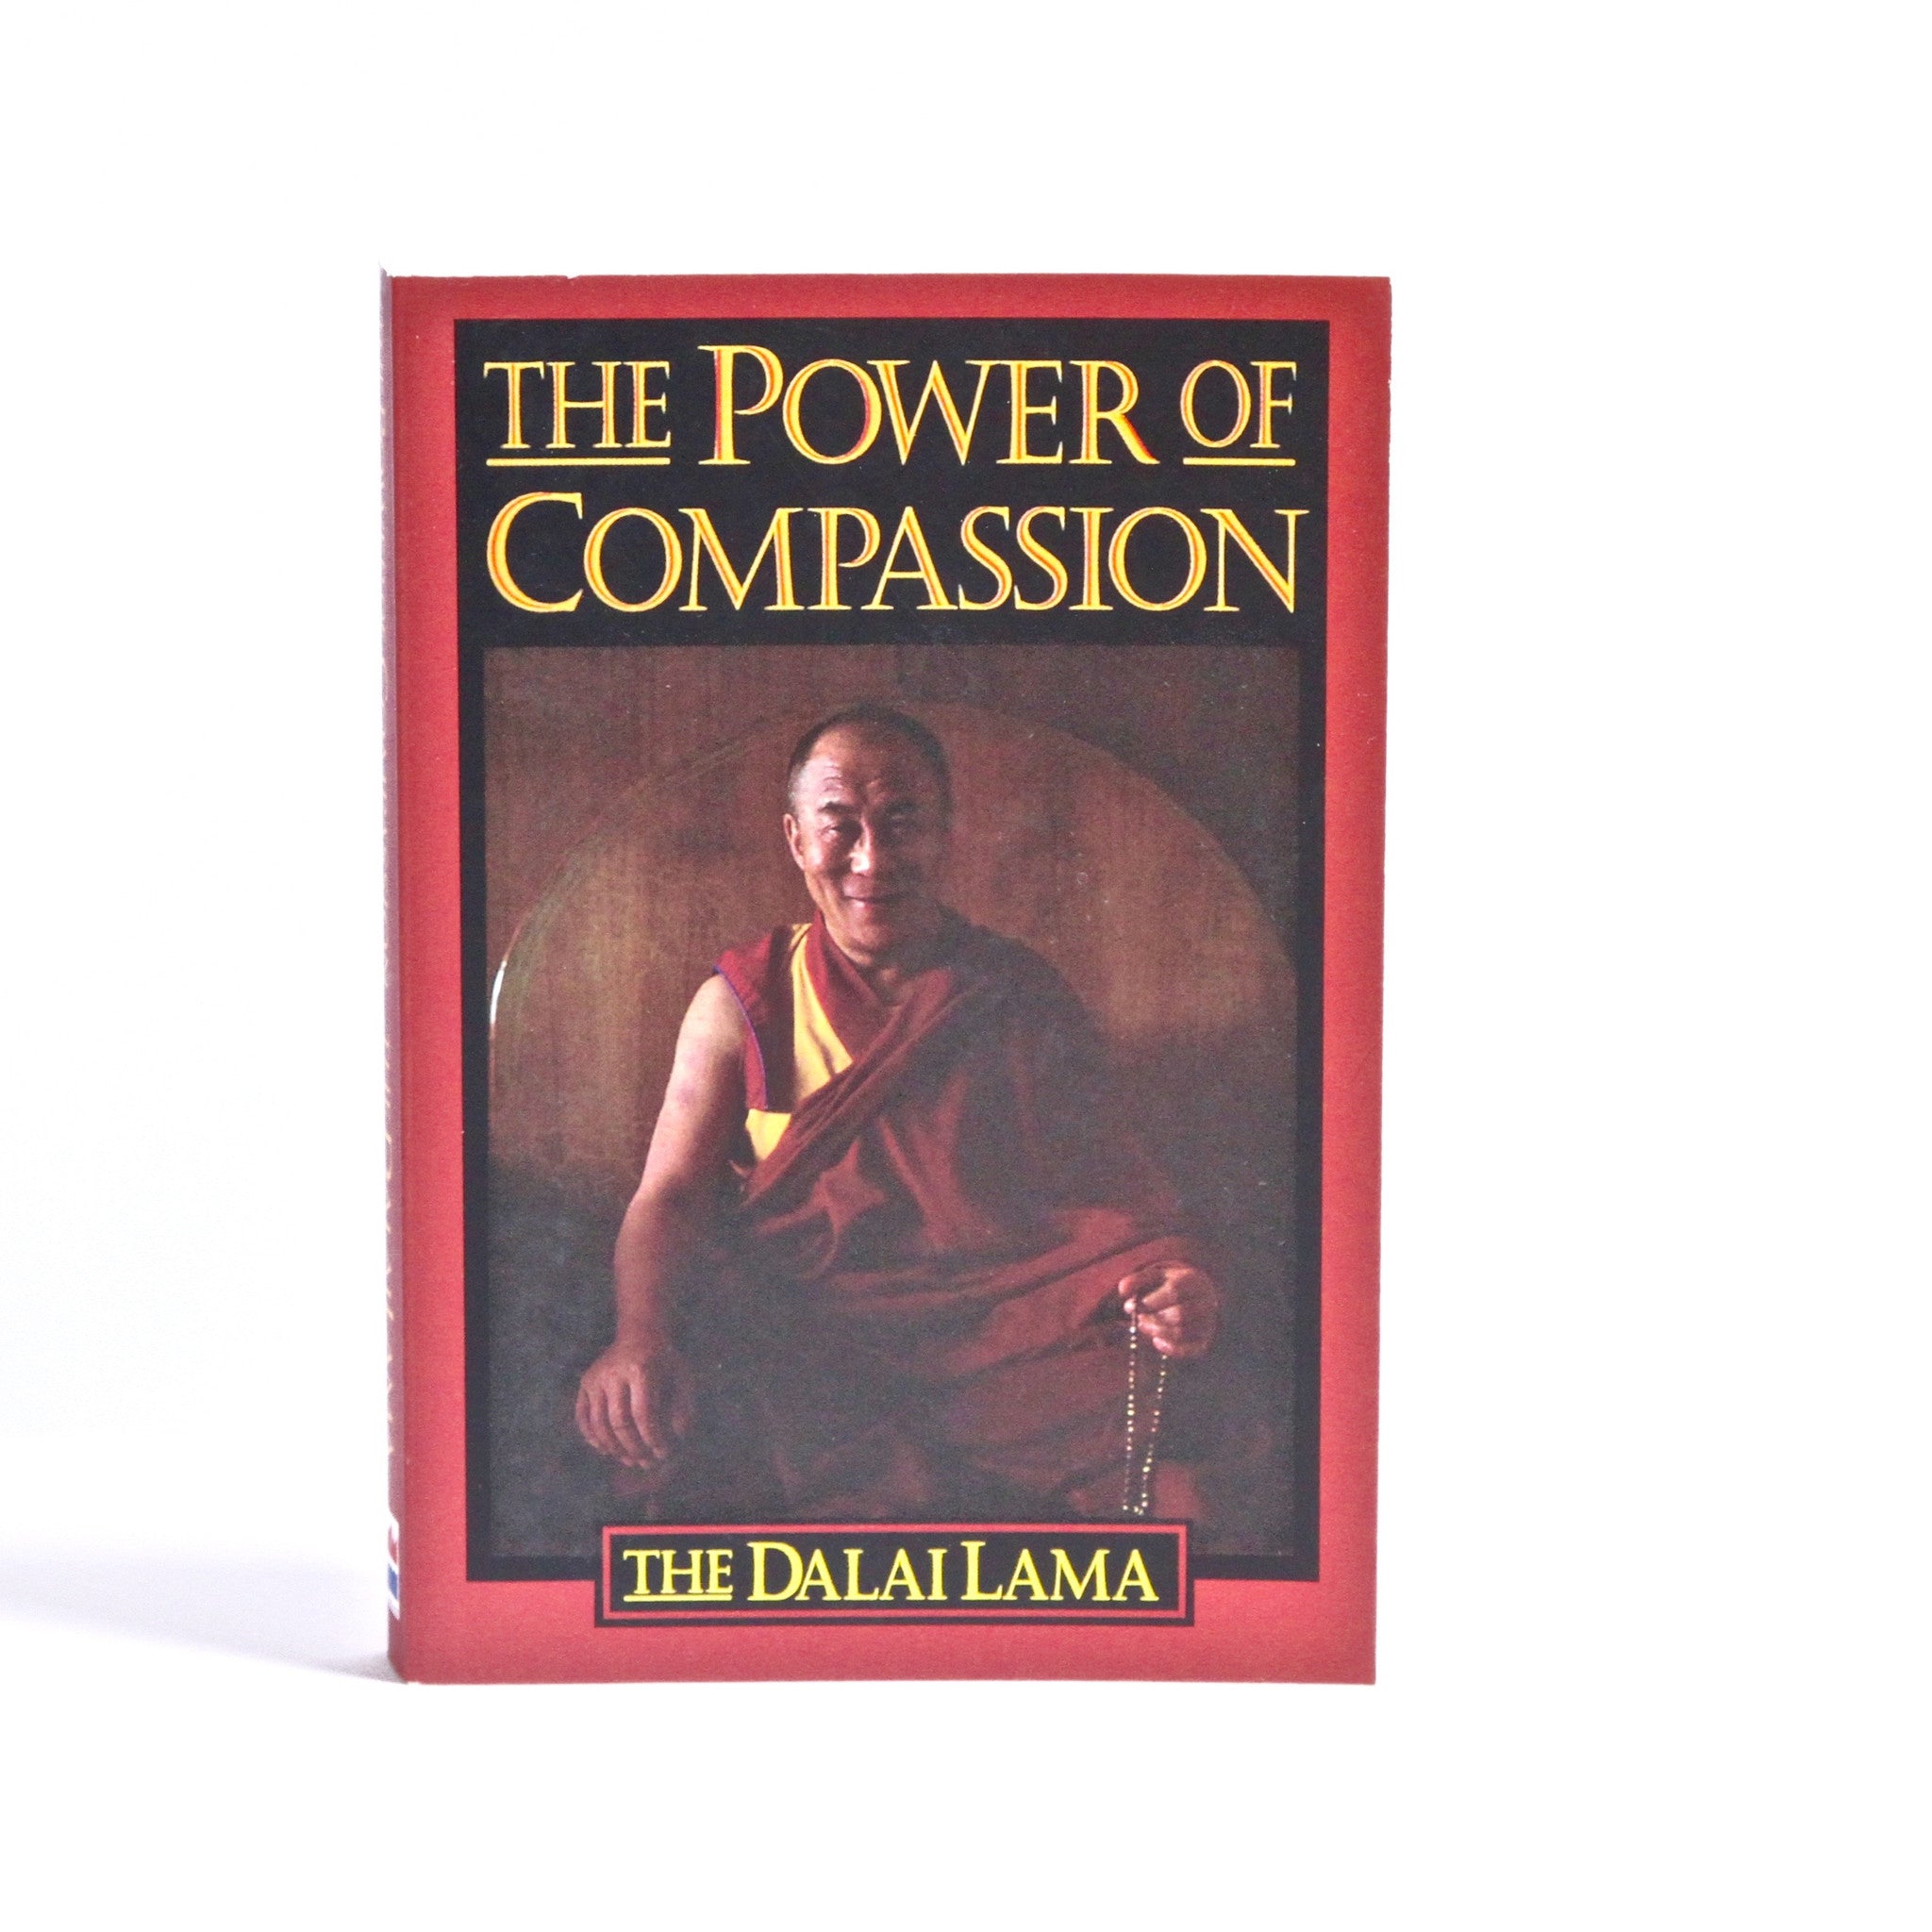 The Power of Compassion : A Collection of Lectures by His Holiness the XIV Dalai Lama